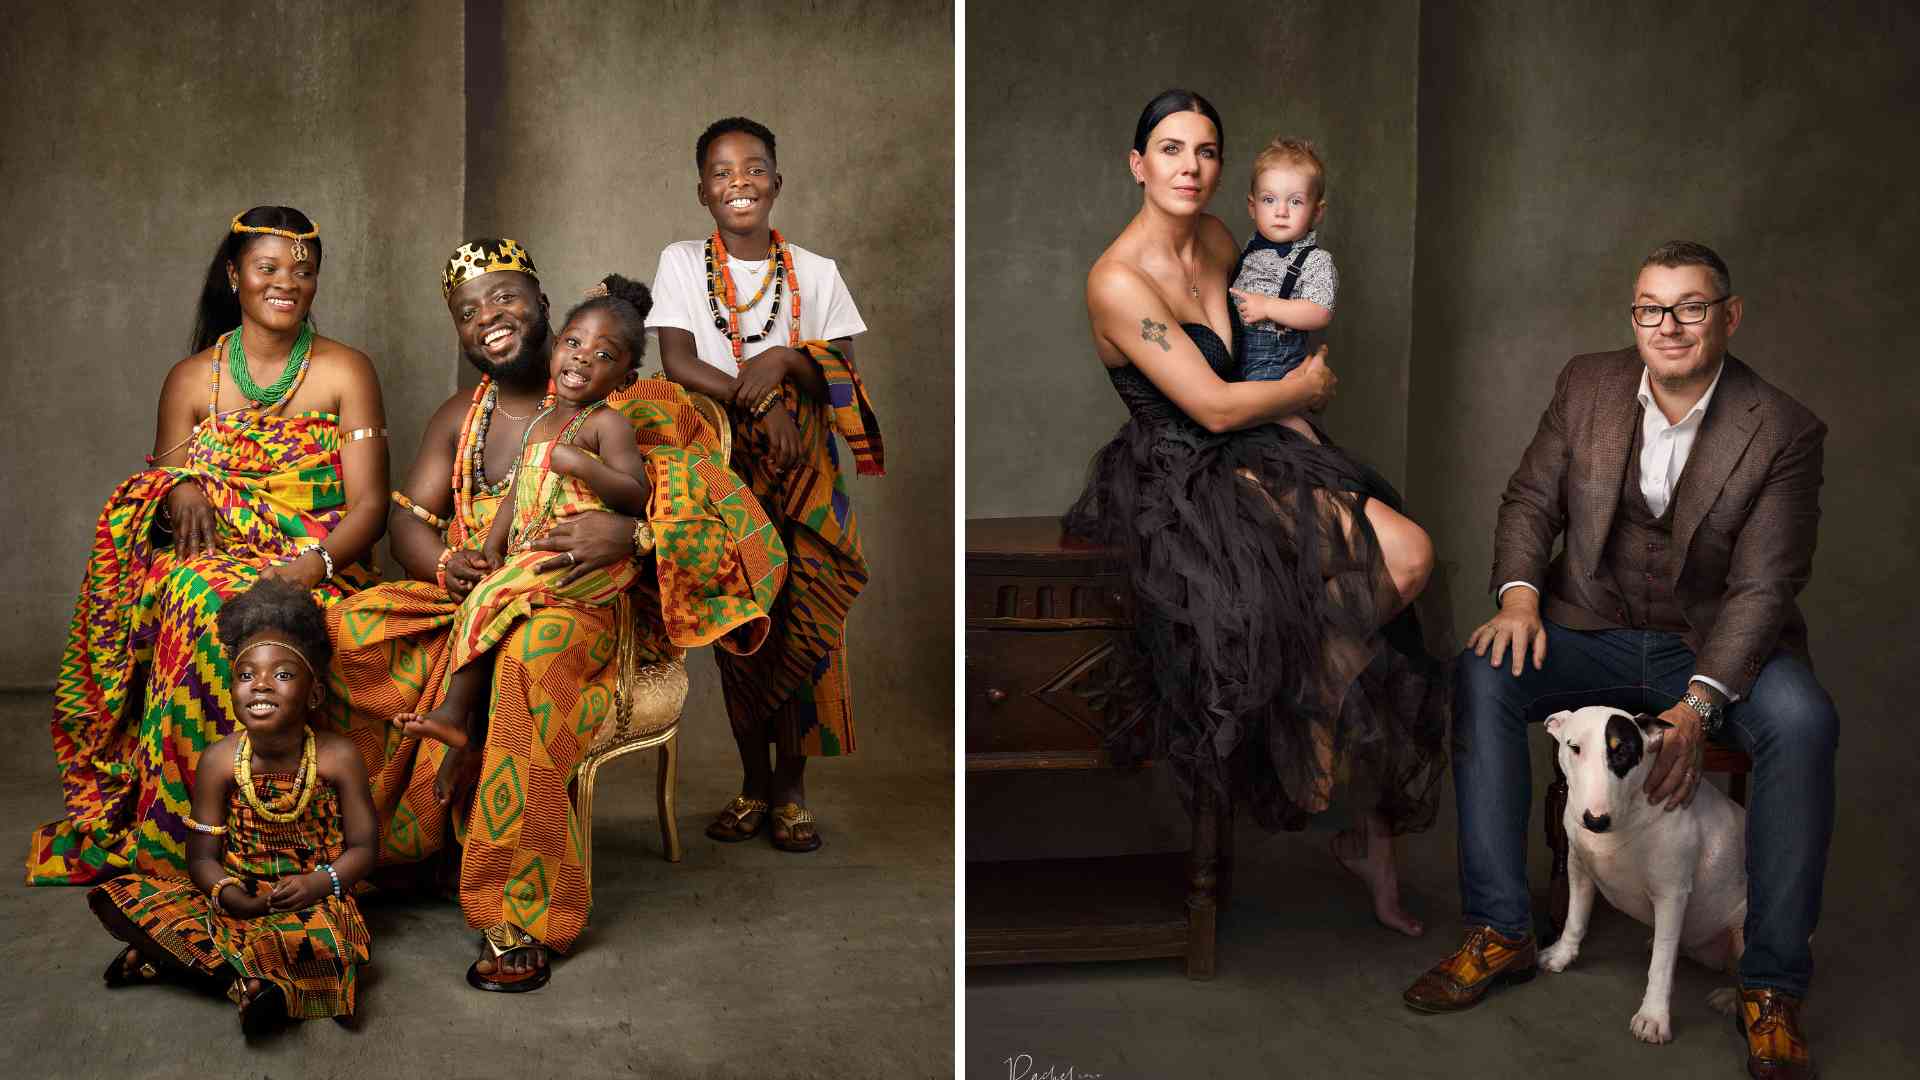 a beautiful family of 5 dressed in traditional Ghana dress on the left image and a family of 3 with their dog on the right